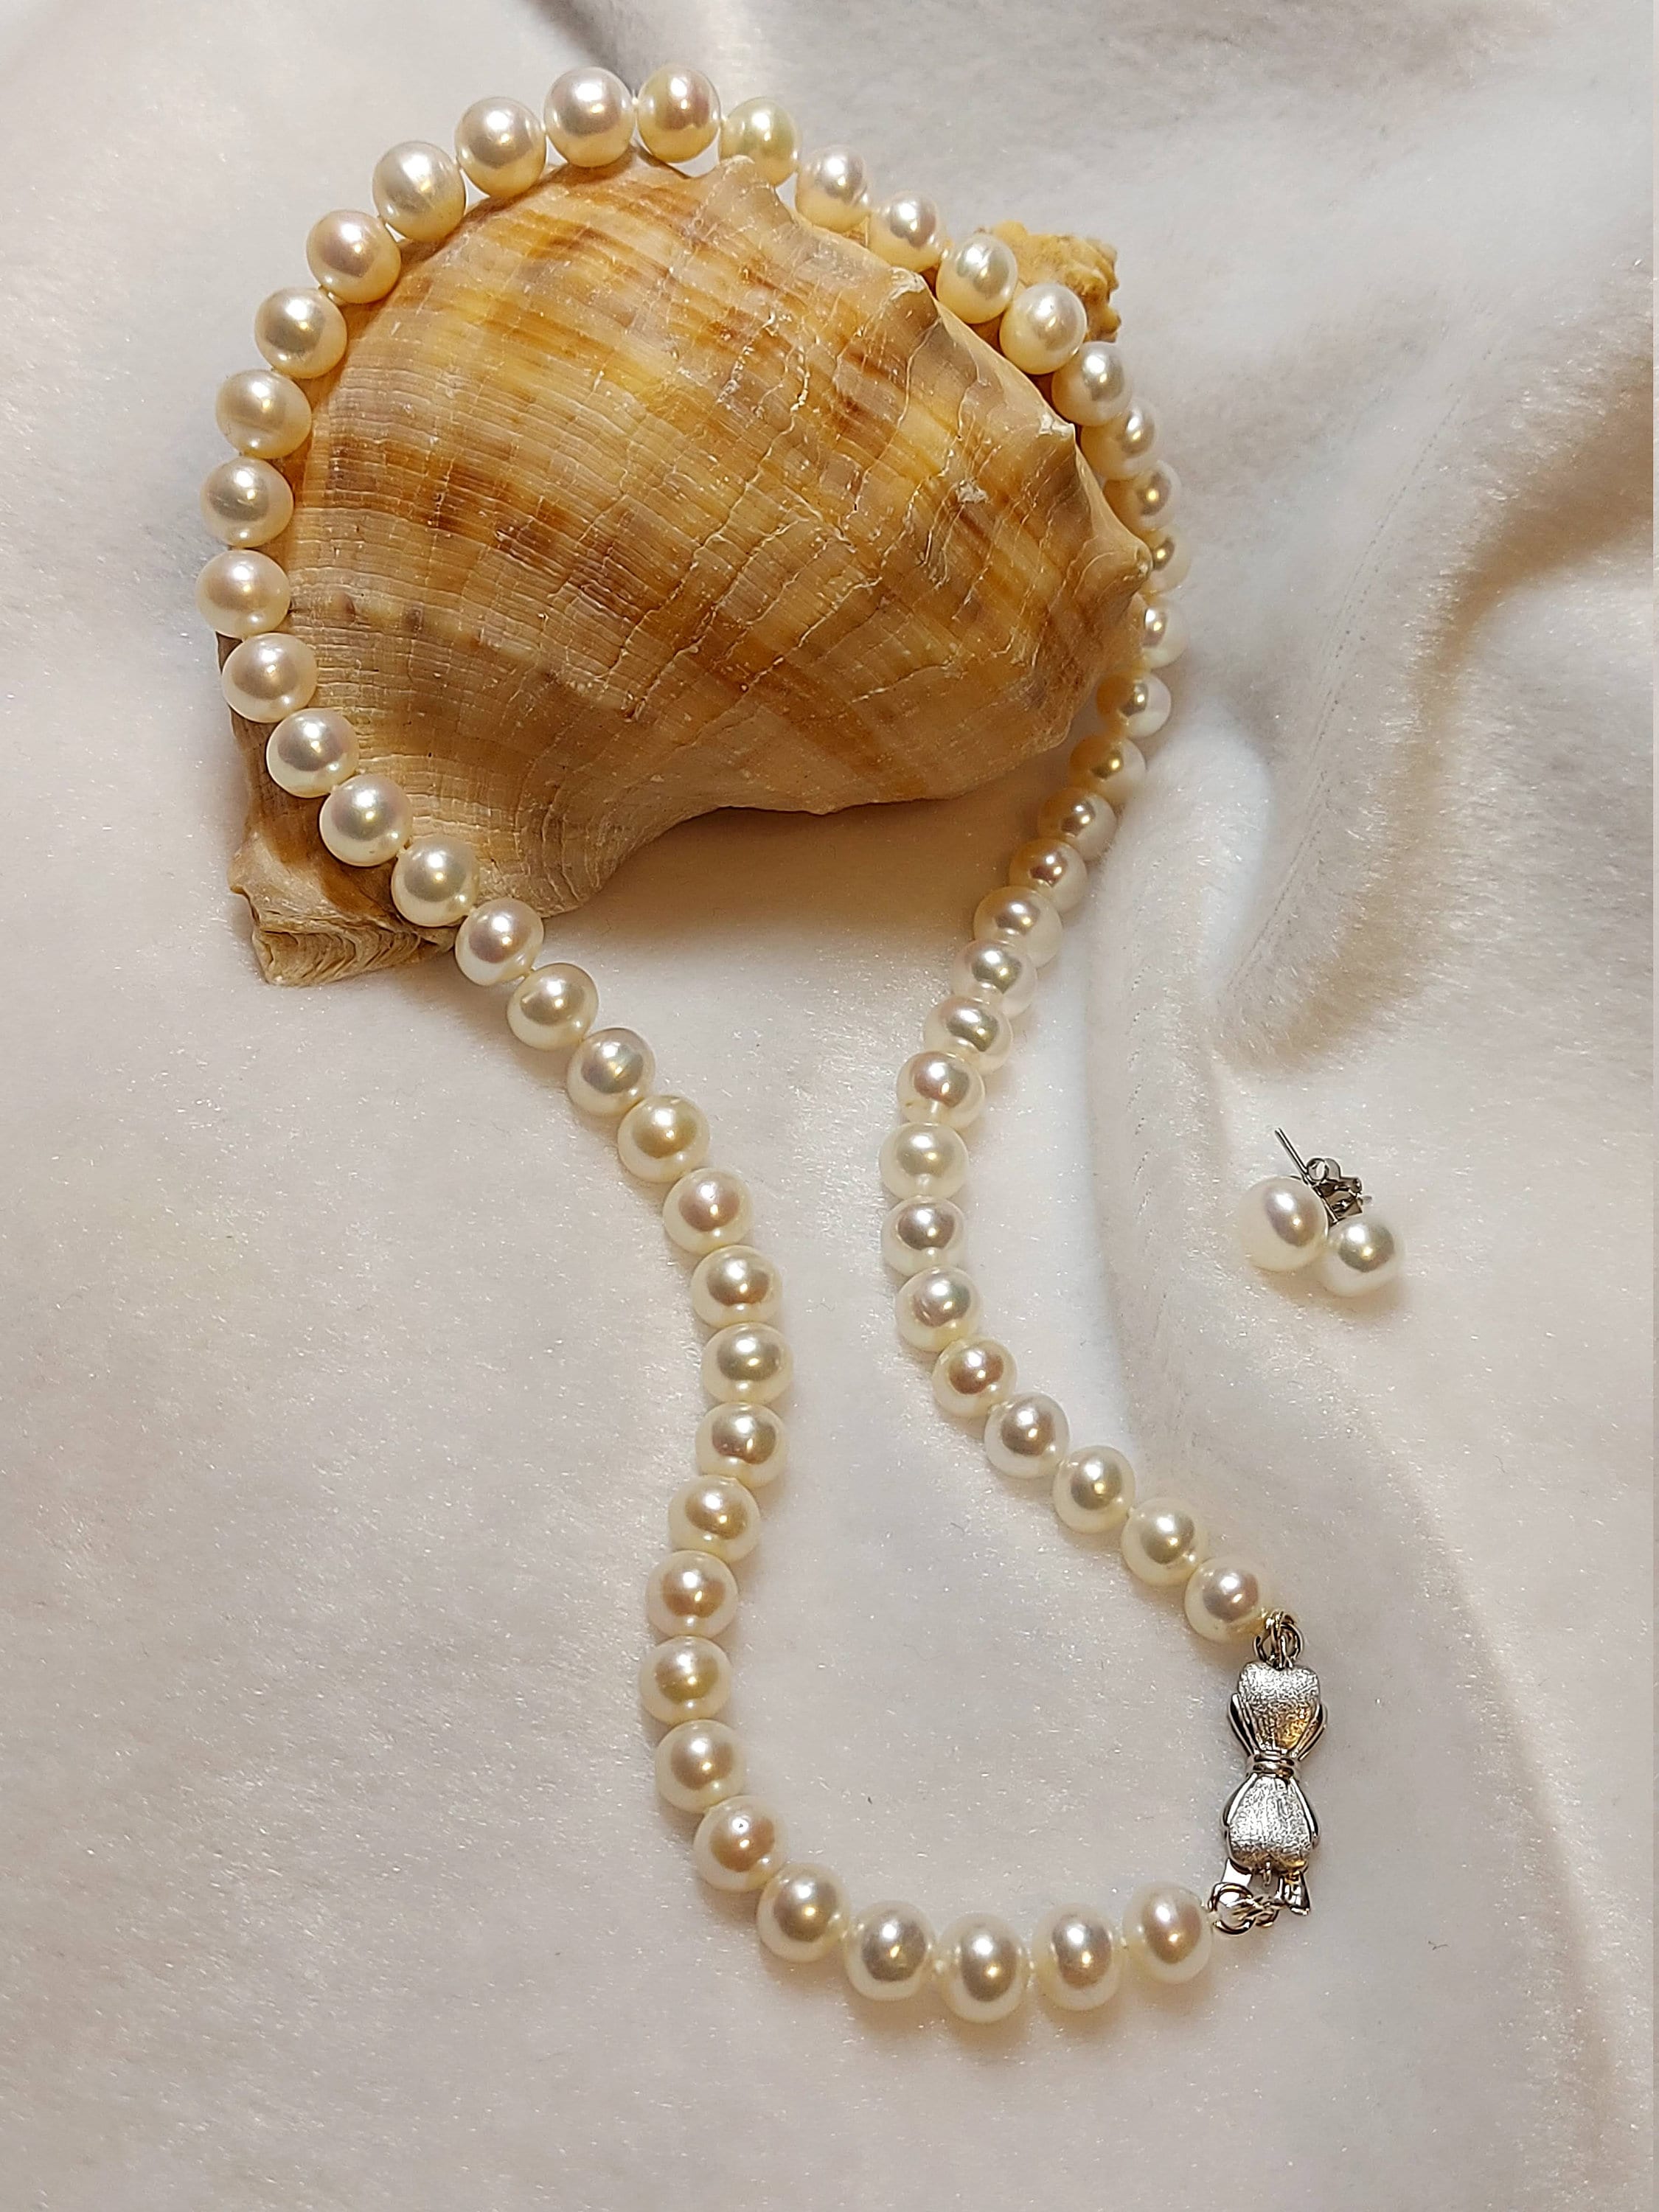 Hand Knotted Freshwater Pearl Necklace and Earrings - White Pearls